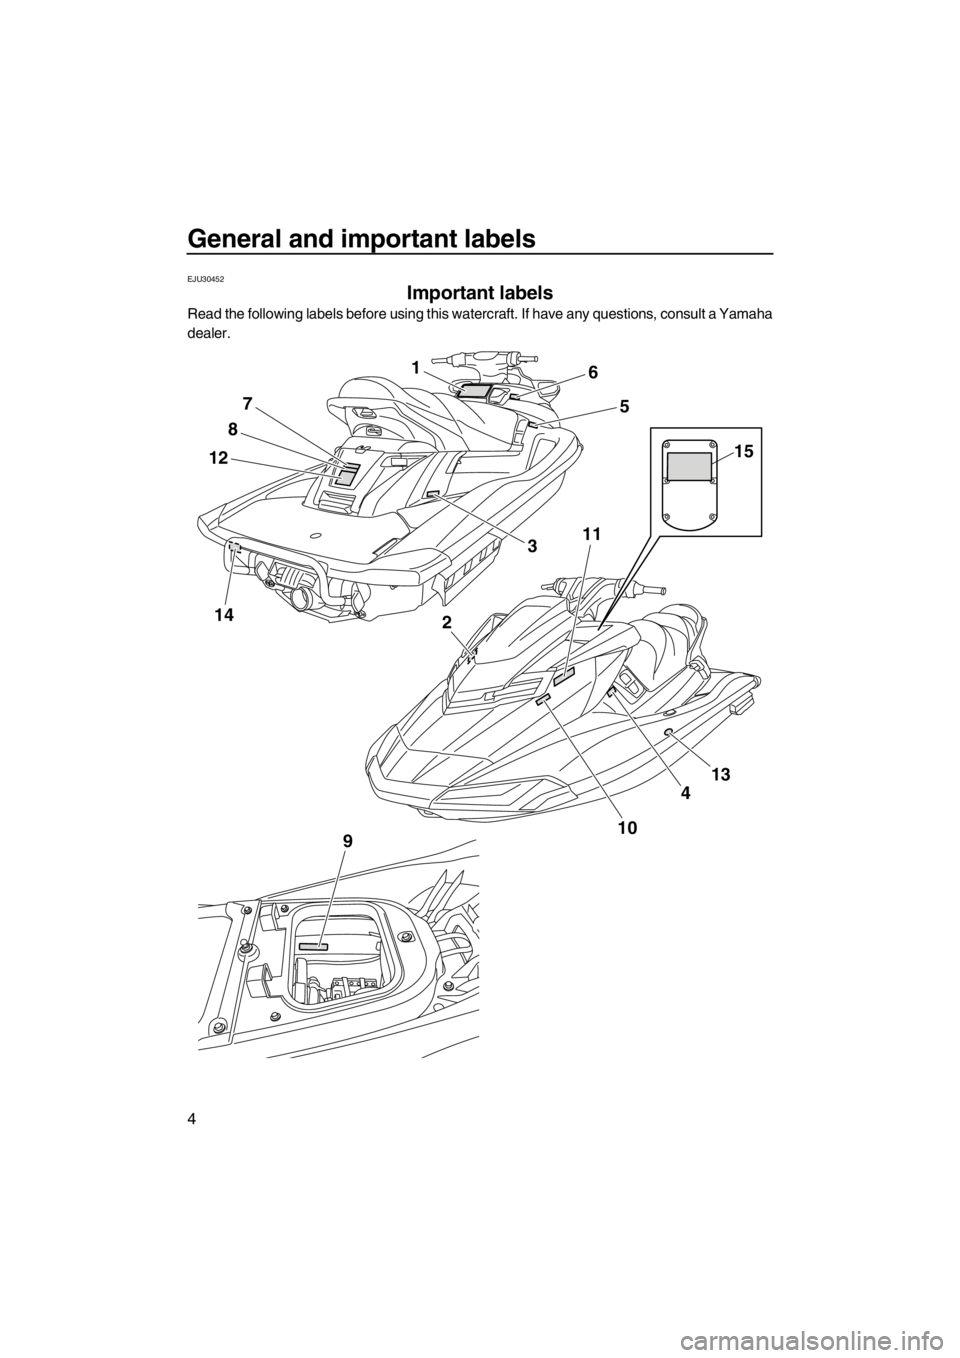 YAMAHA FX HO 2012  Owners Manual General and important labels
4
EJU30452
Important labels 
Read the following labels before using this watercraft. If have any questions, consult a Yamaha
dealer.
14
1
12
8
7
11
2
9
4
13
10
6
5
3
15
UF